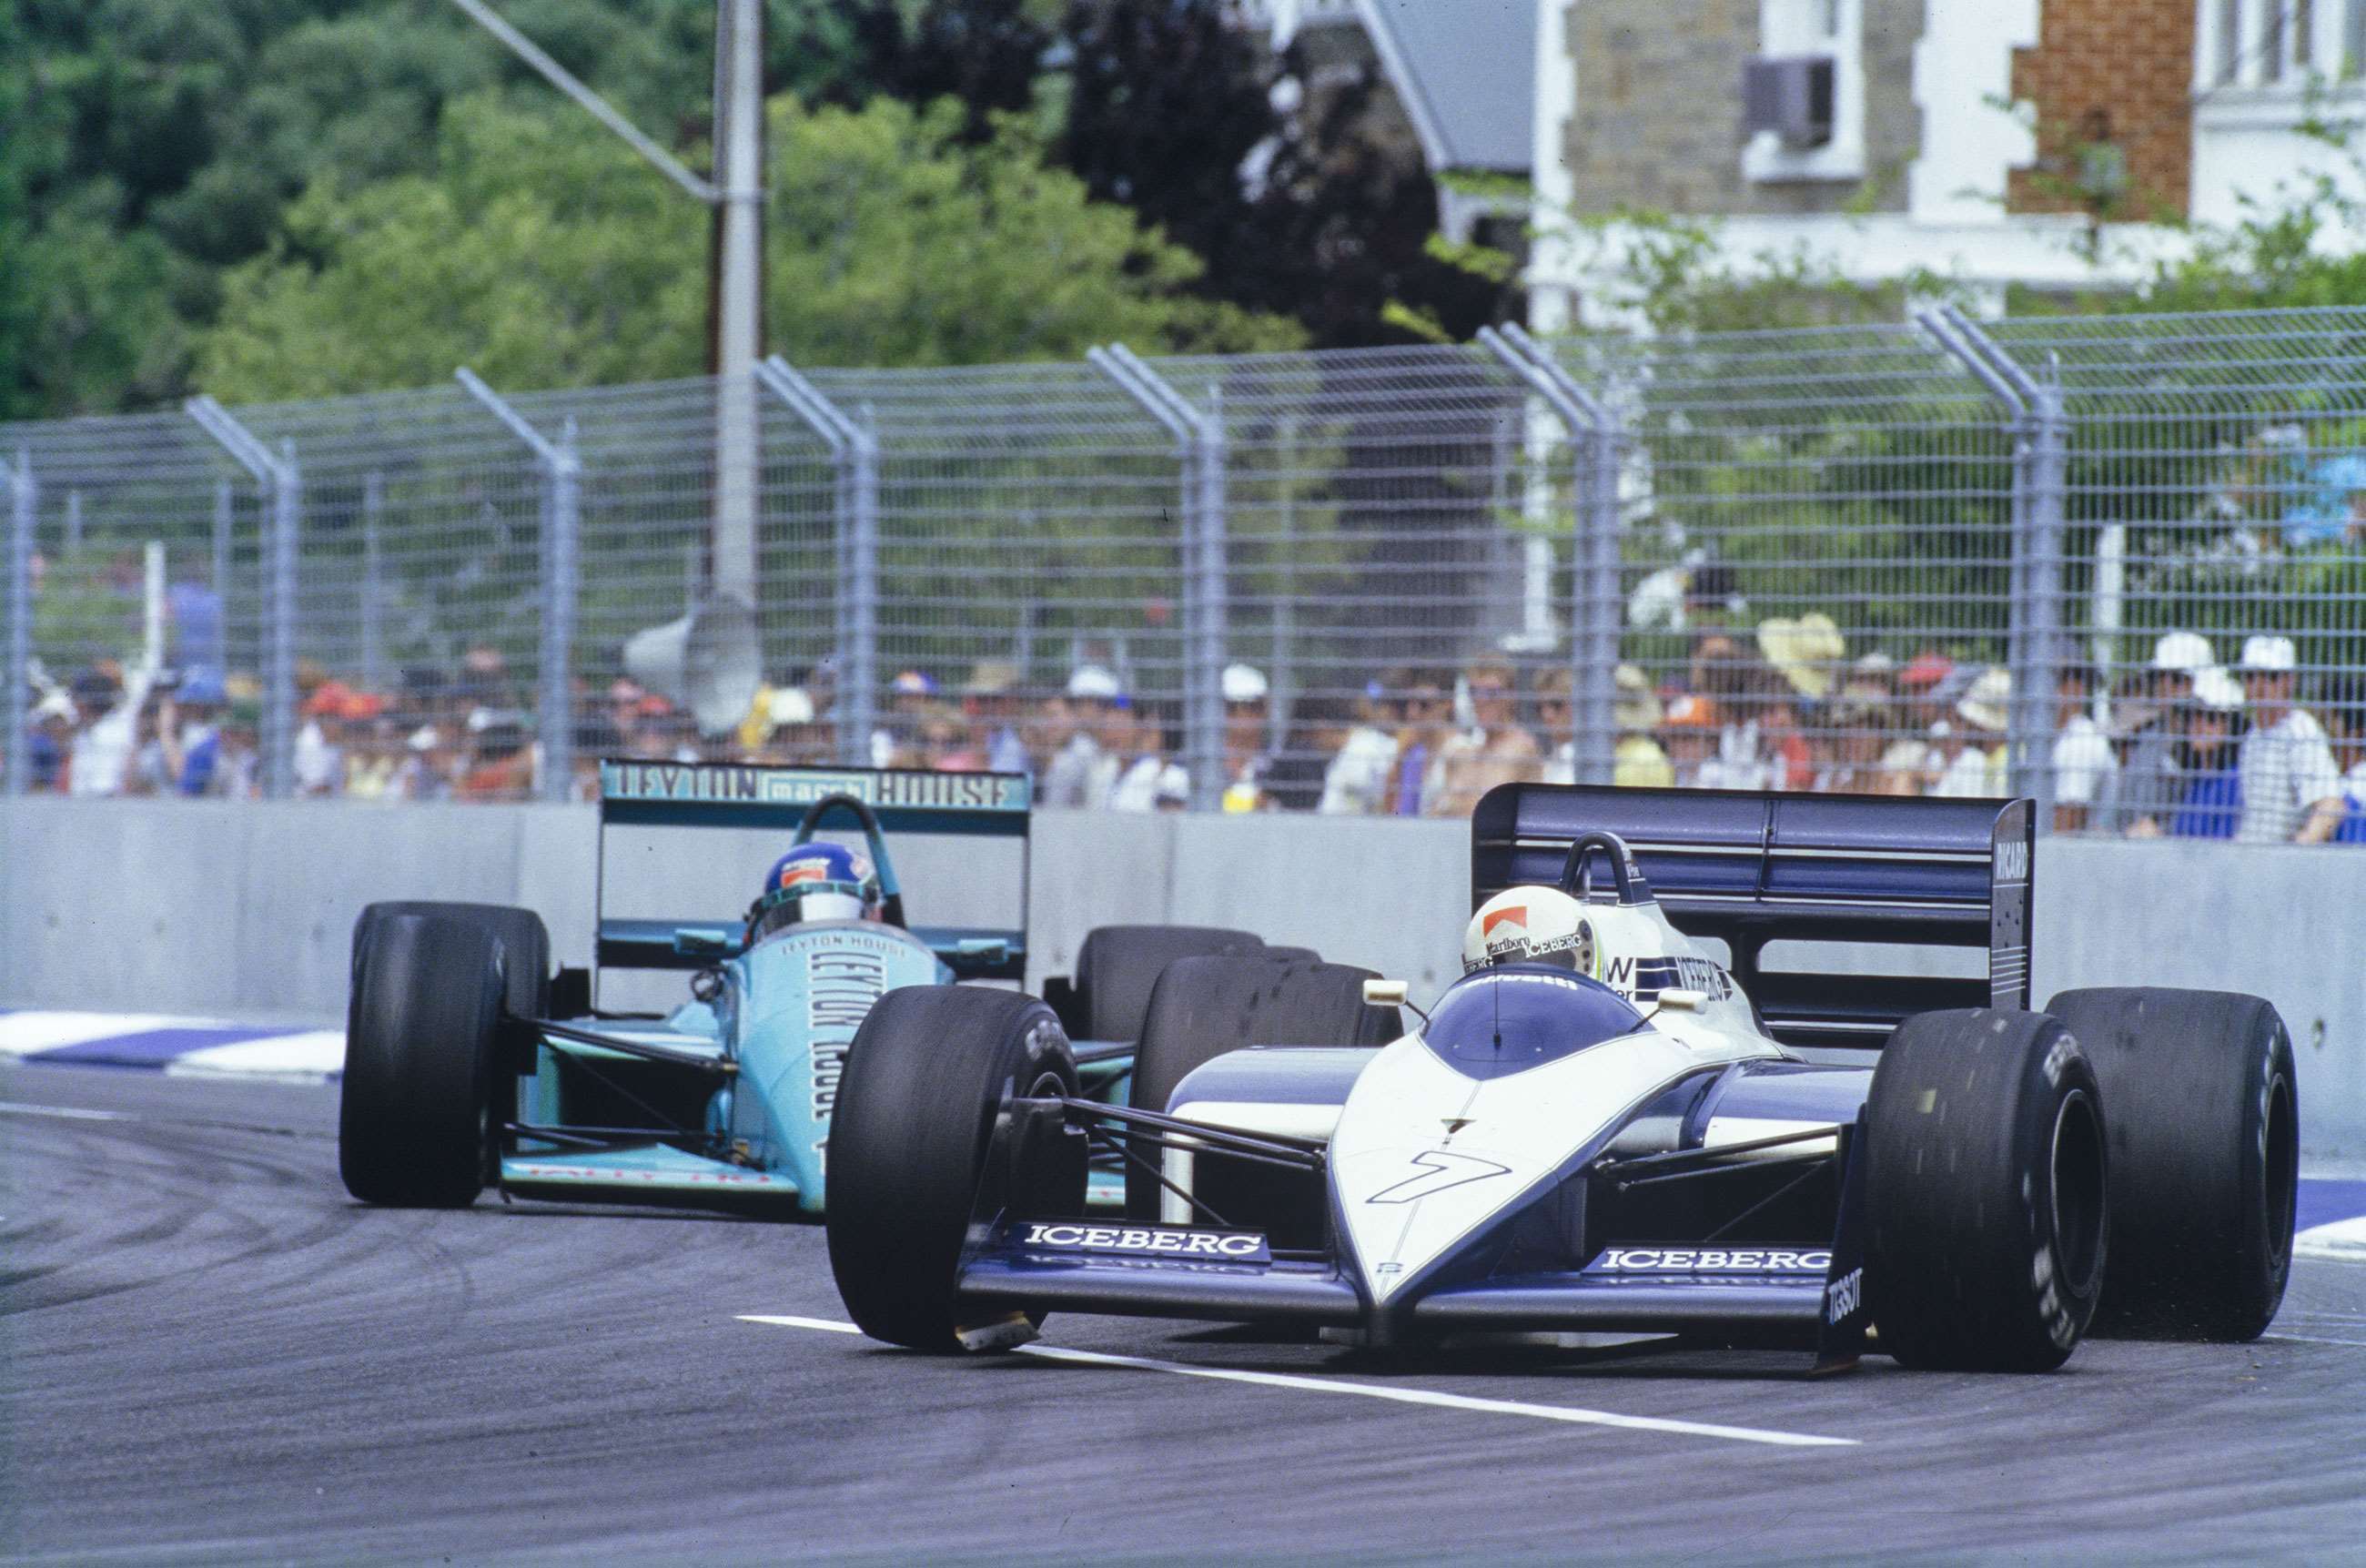 Modena at the 1987 Australian GP in Adelaide, driving the Brabham BT56, leading Ivan Capelli in his March 871.